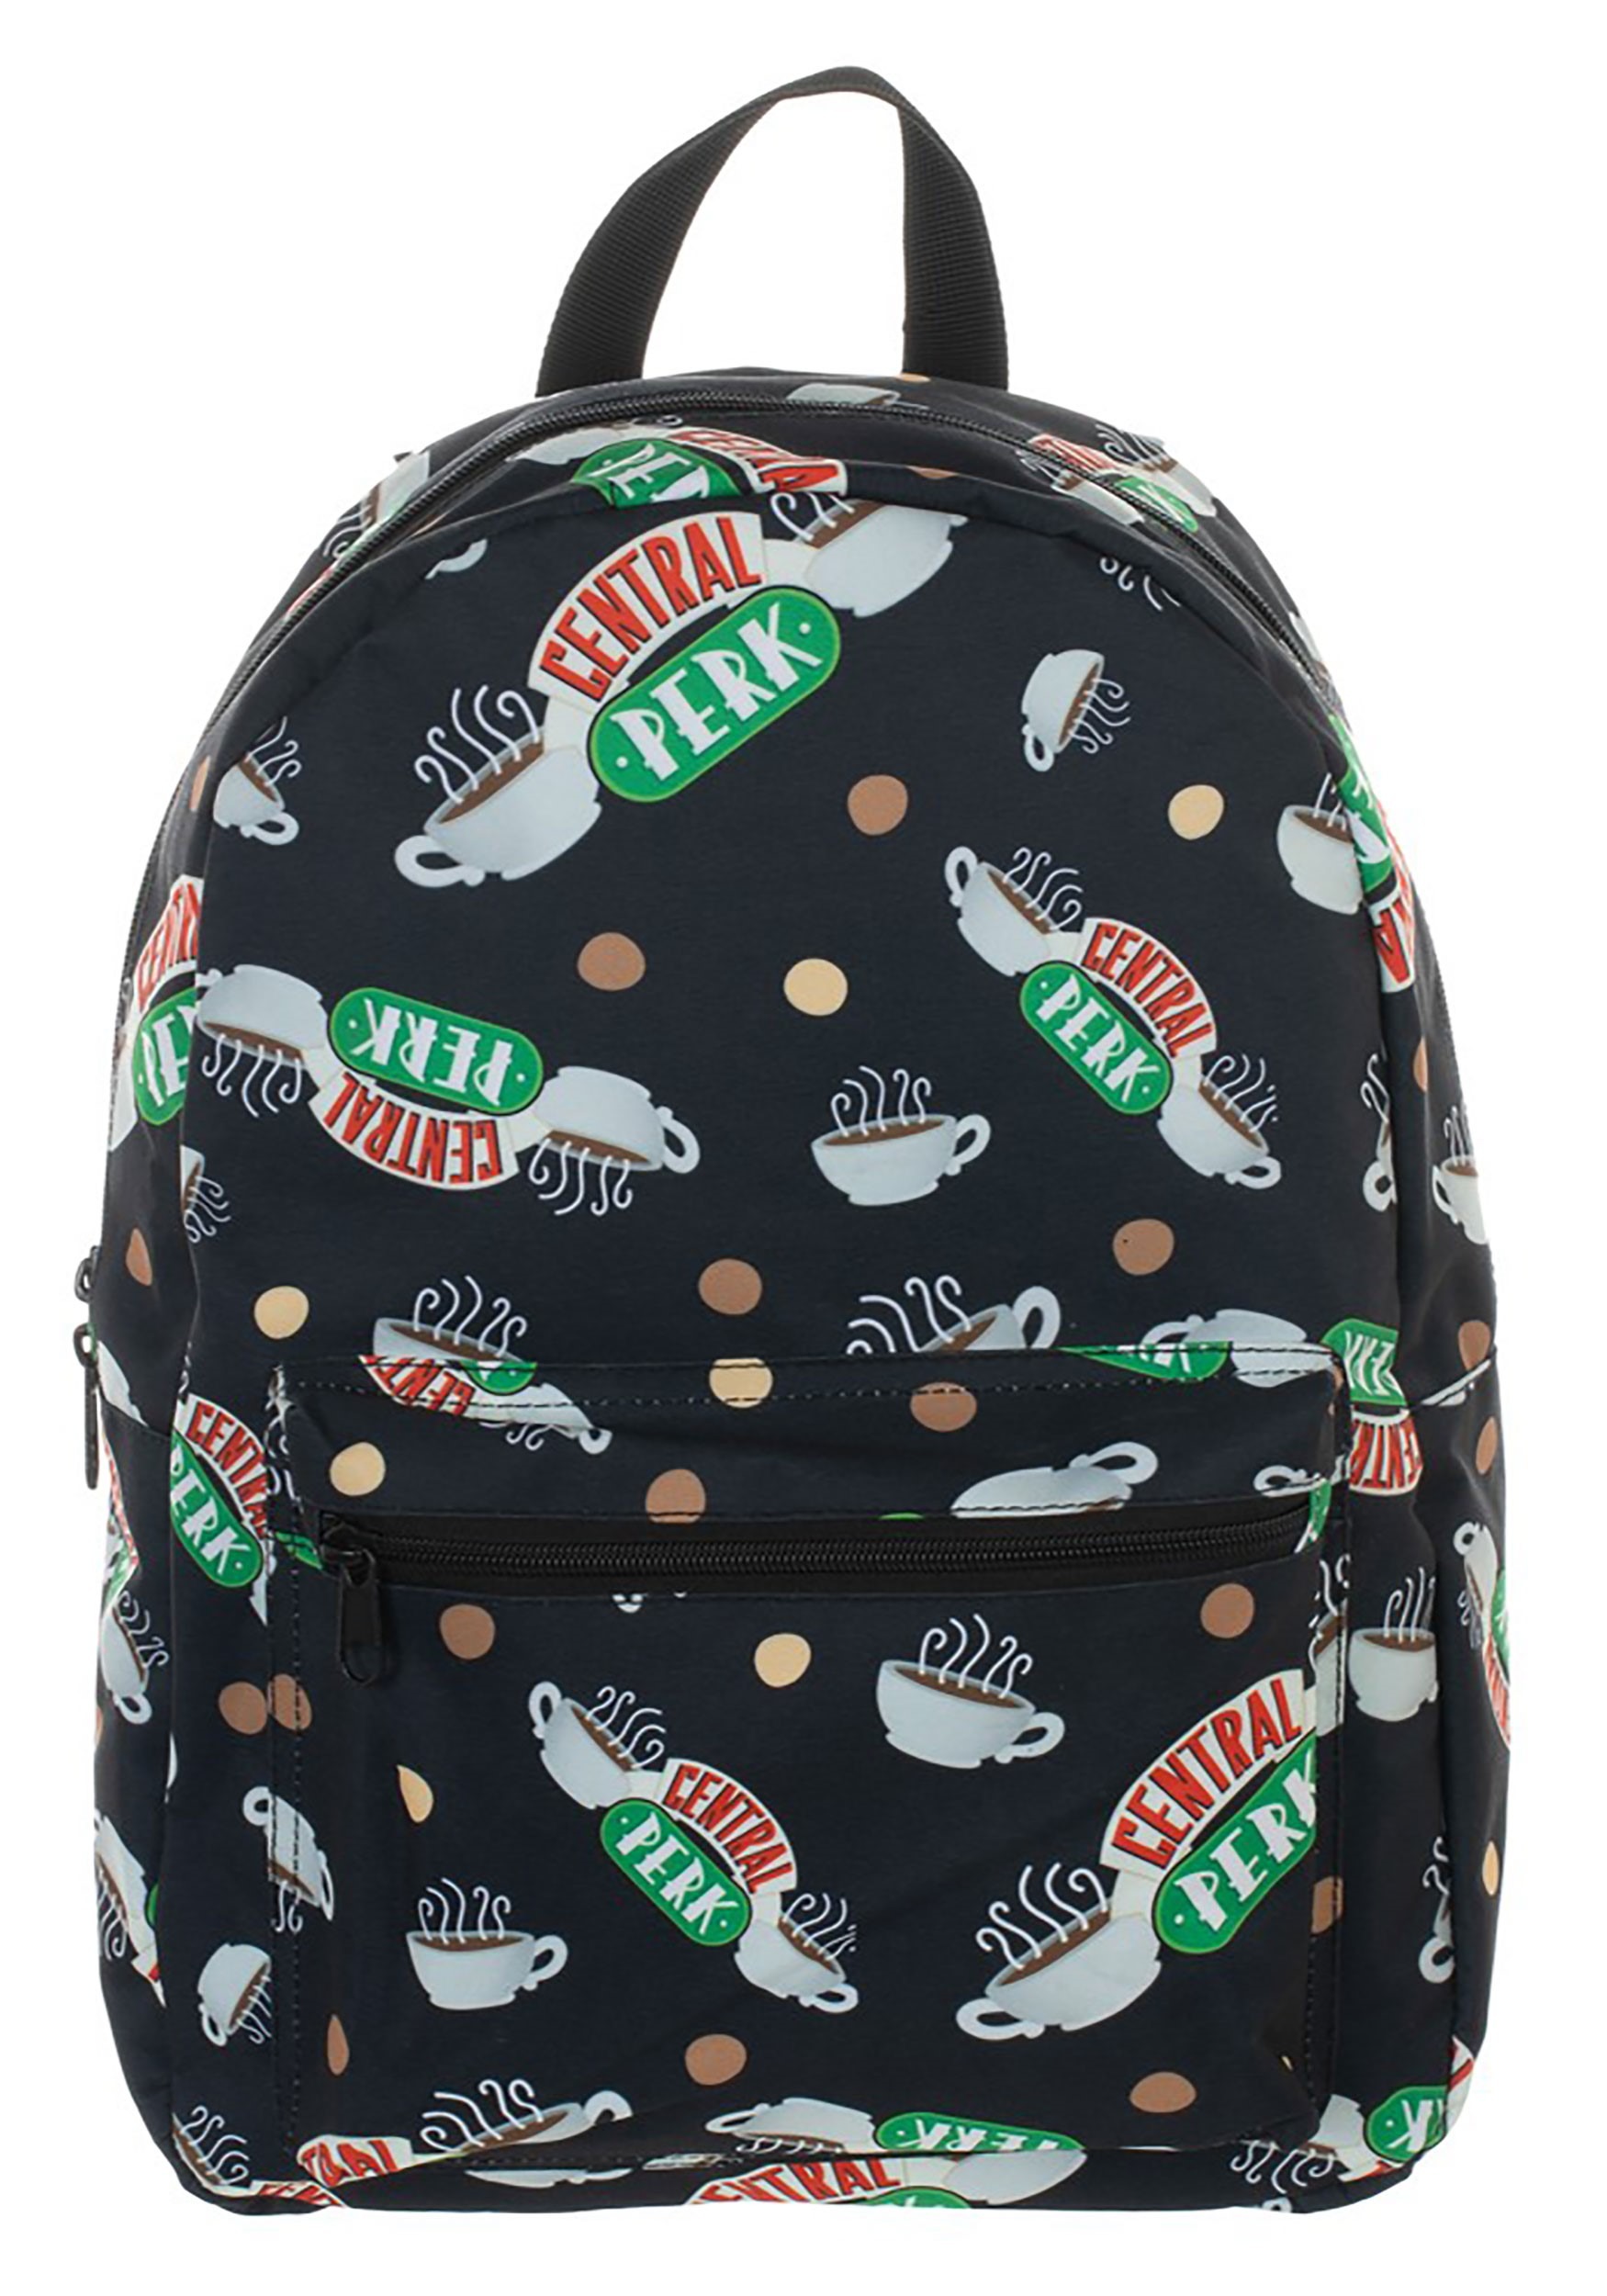 Friends Central Perk Coffee All Over Print Sublimated Backpack